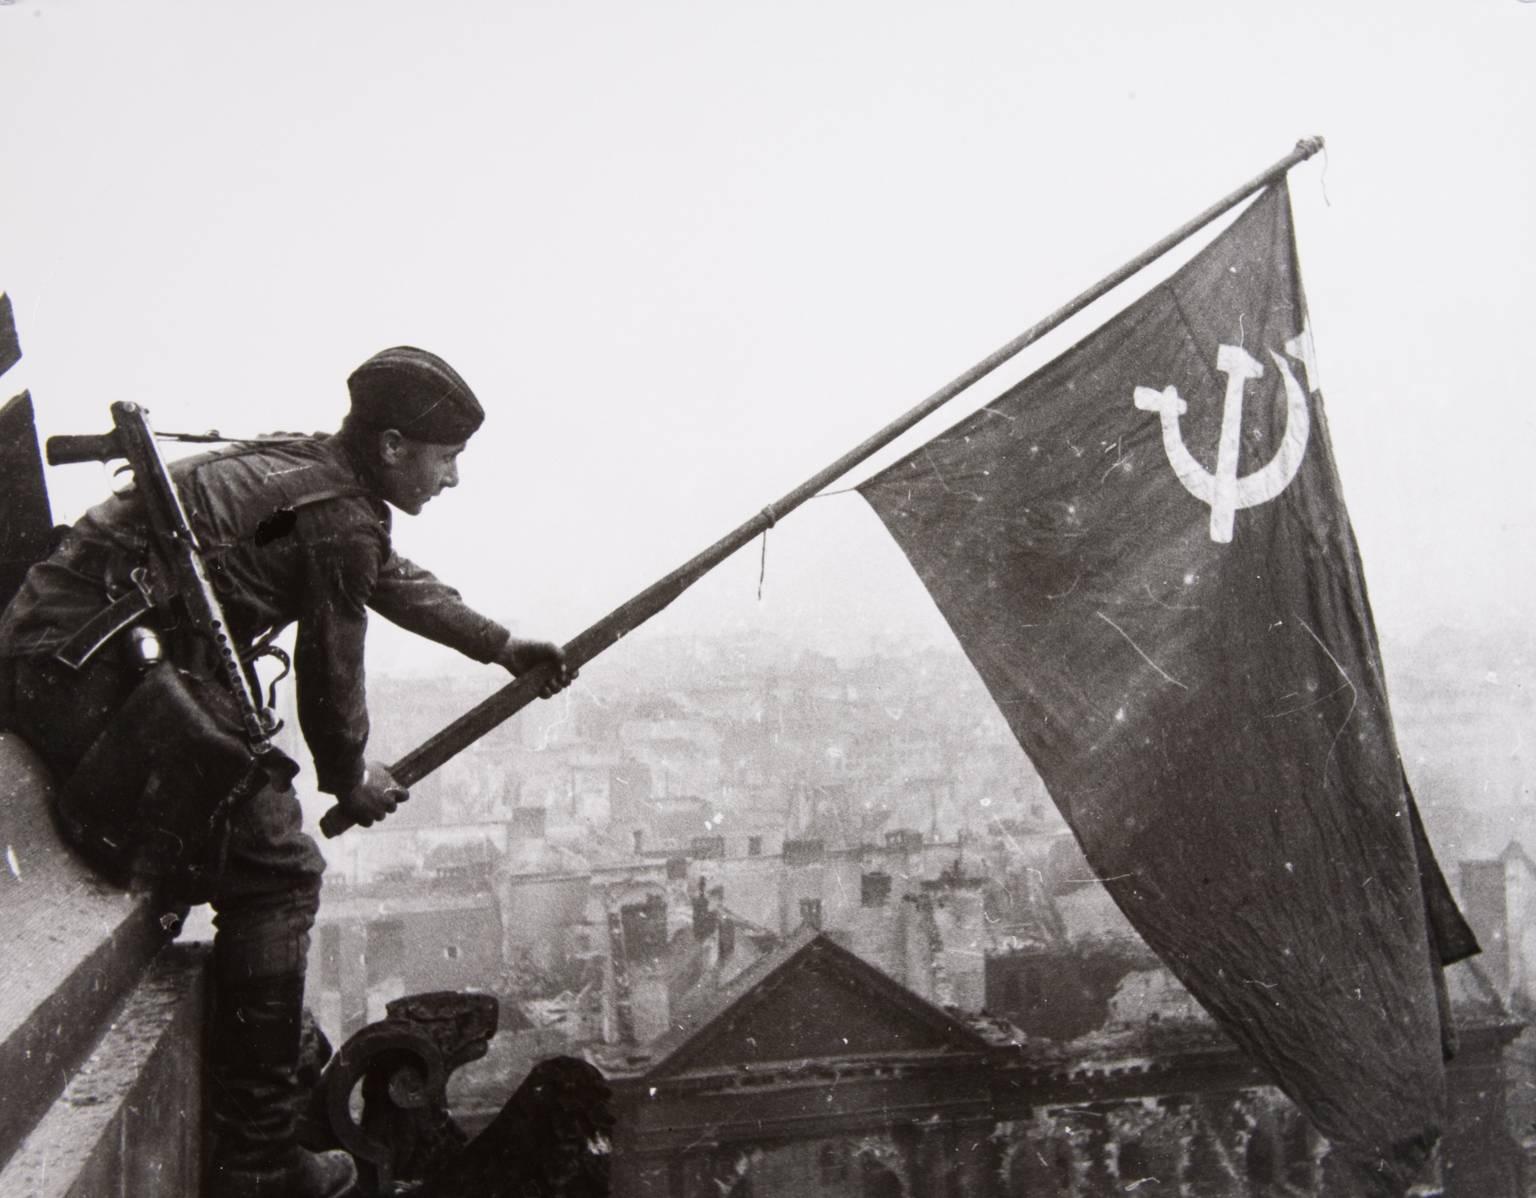 Yevgeny Khaldei Black and White Photograph - Raising the Hammer and Sickle over the Reichstag (variant 2)